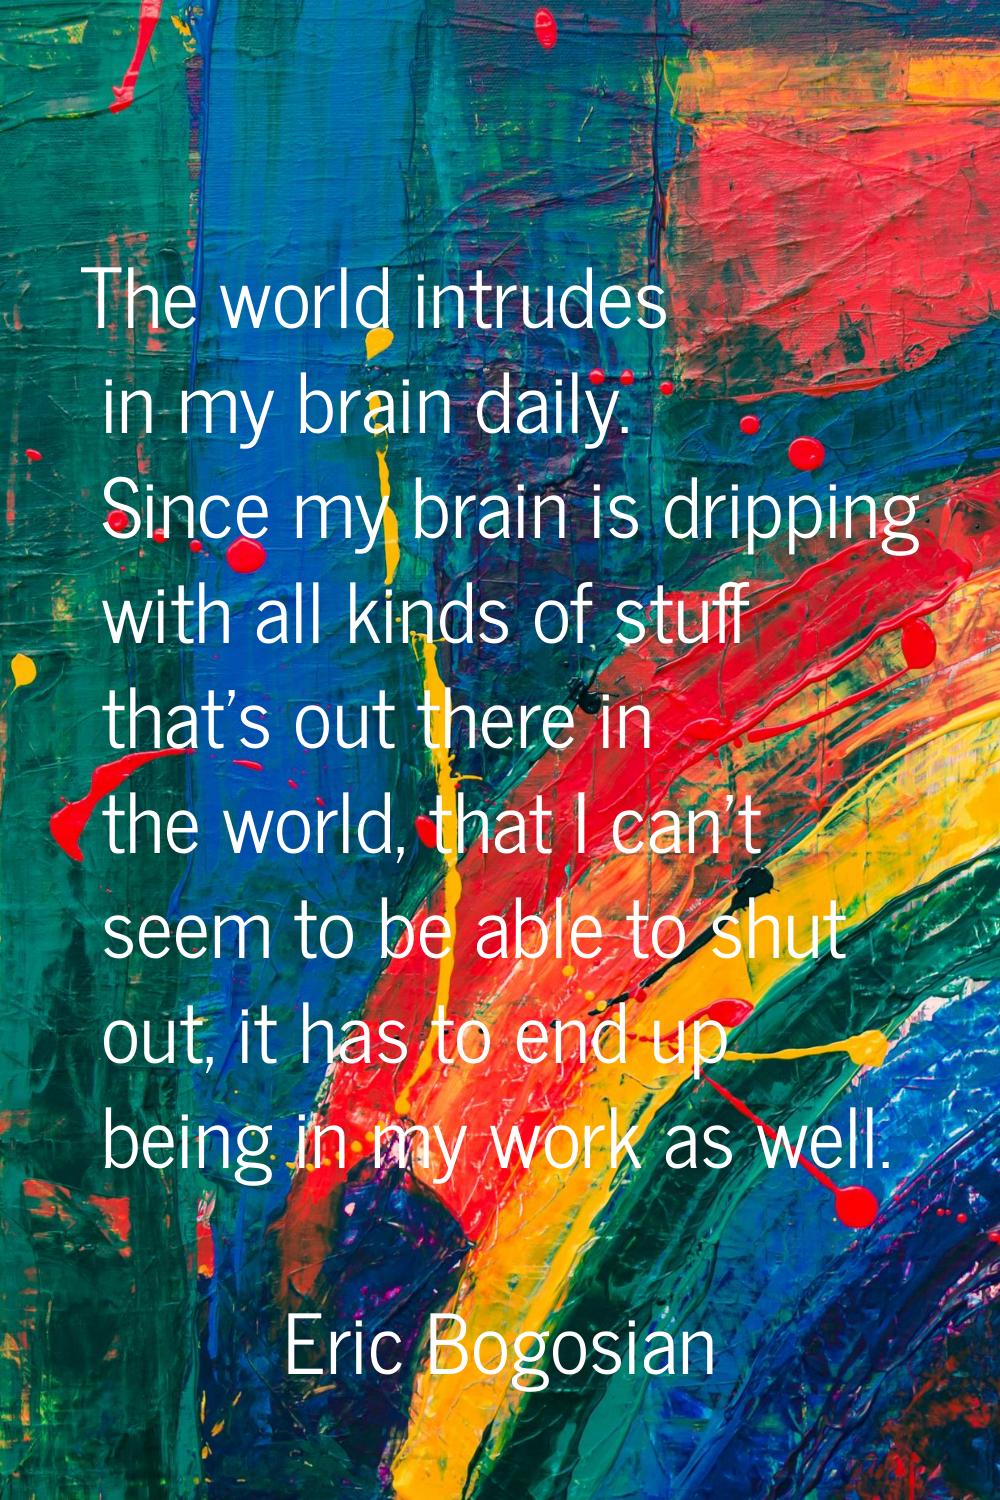 The world intrudes in my brain daily. Since my brain is dripping with all kinds of stuff that's out